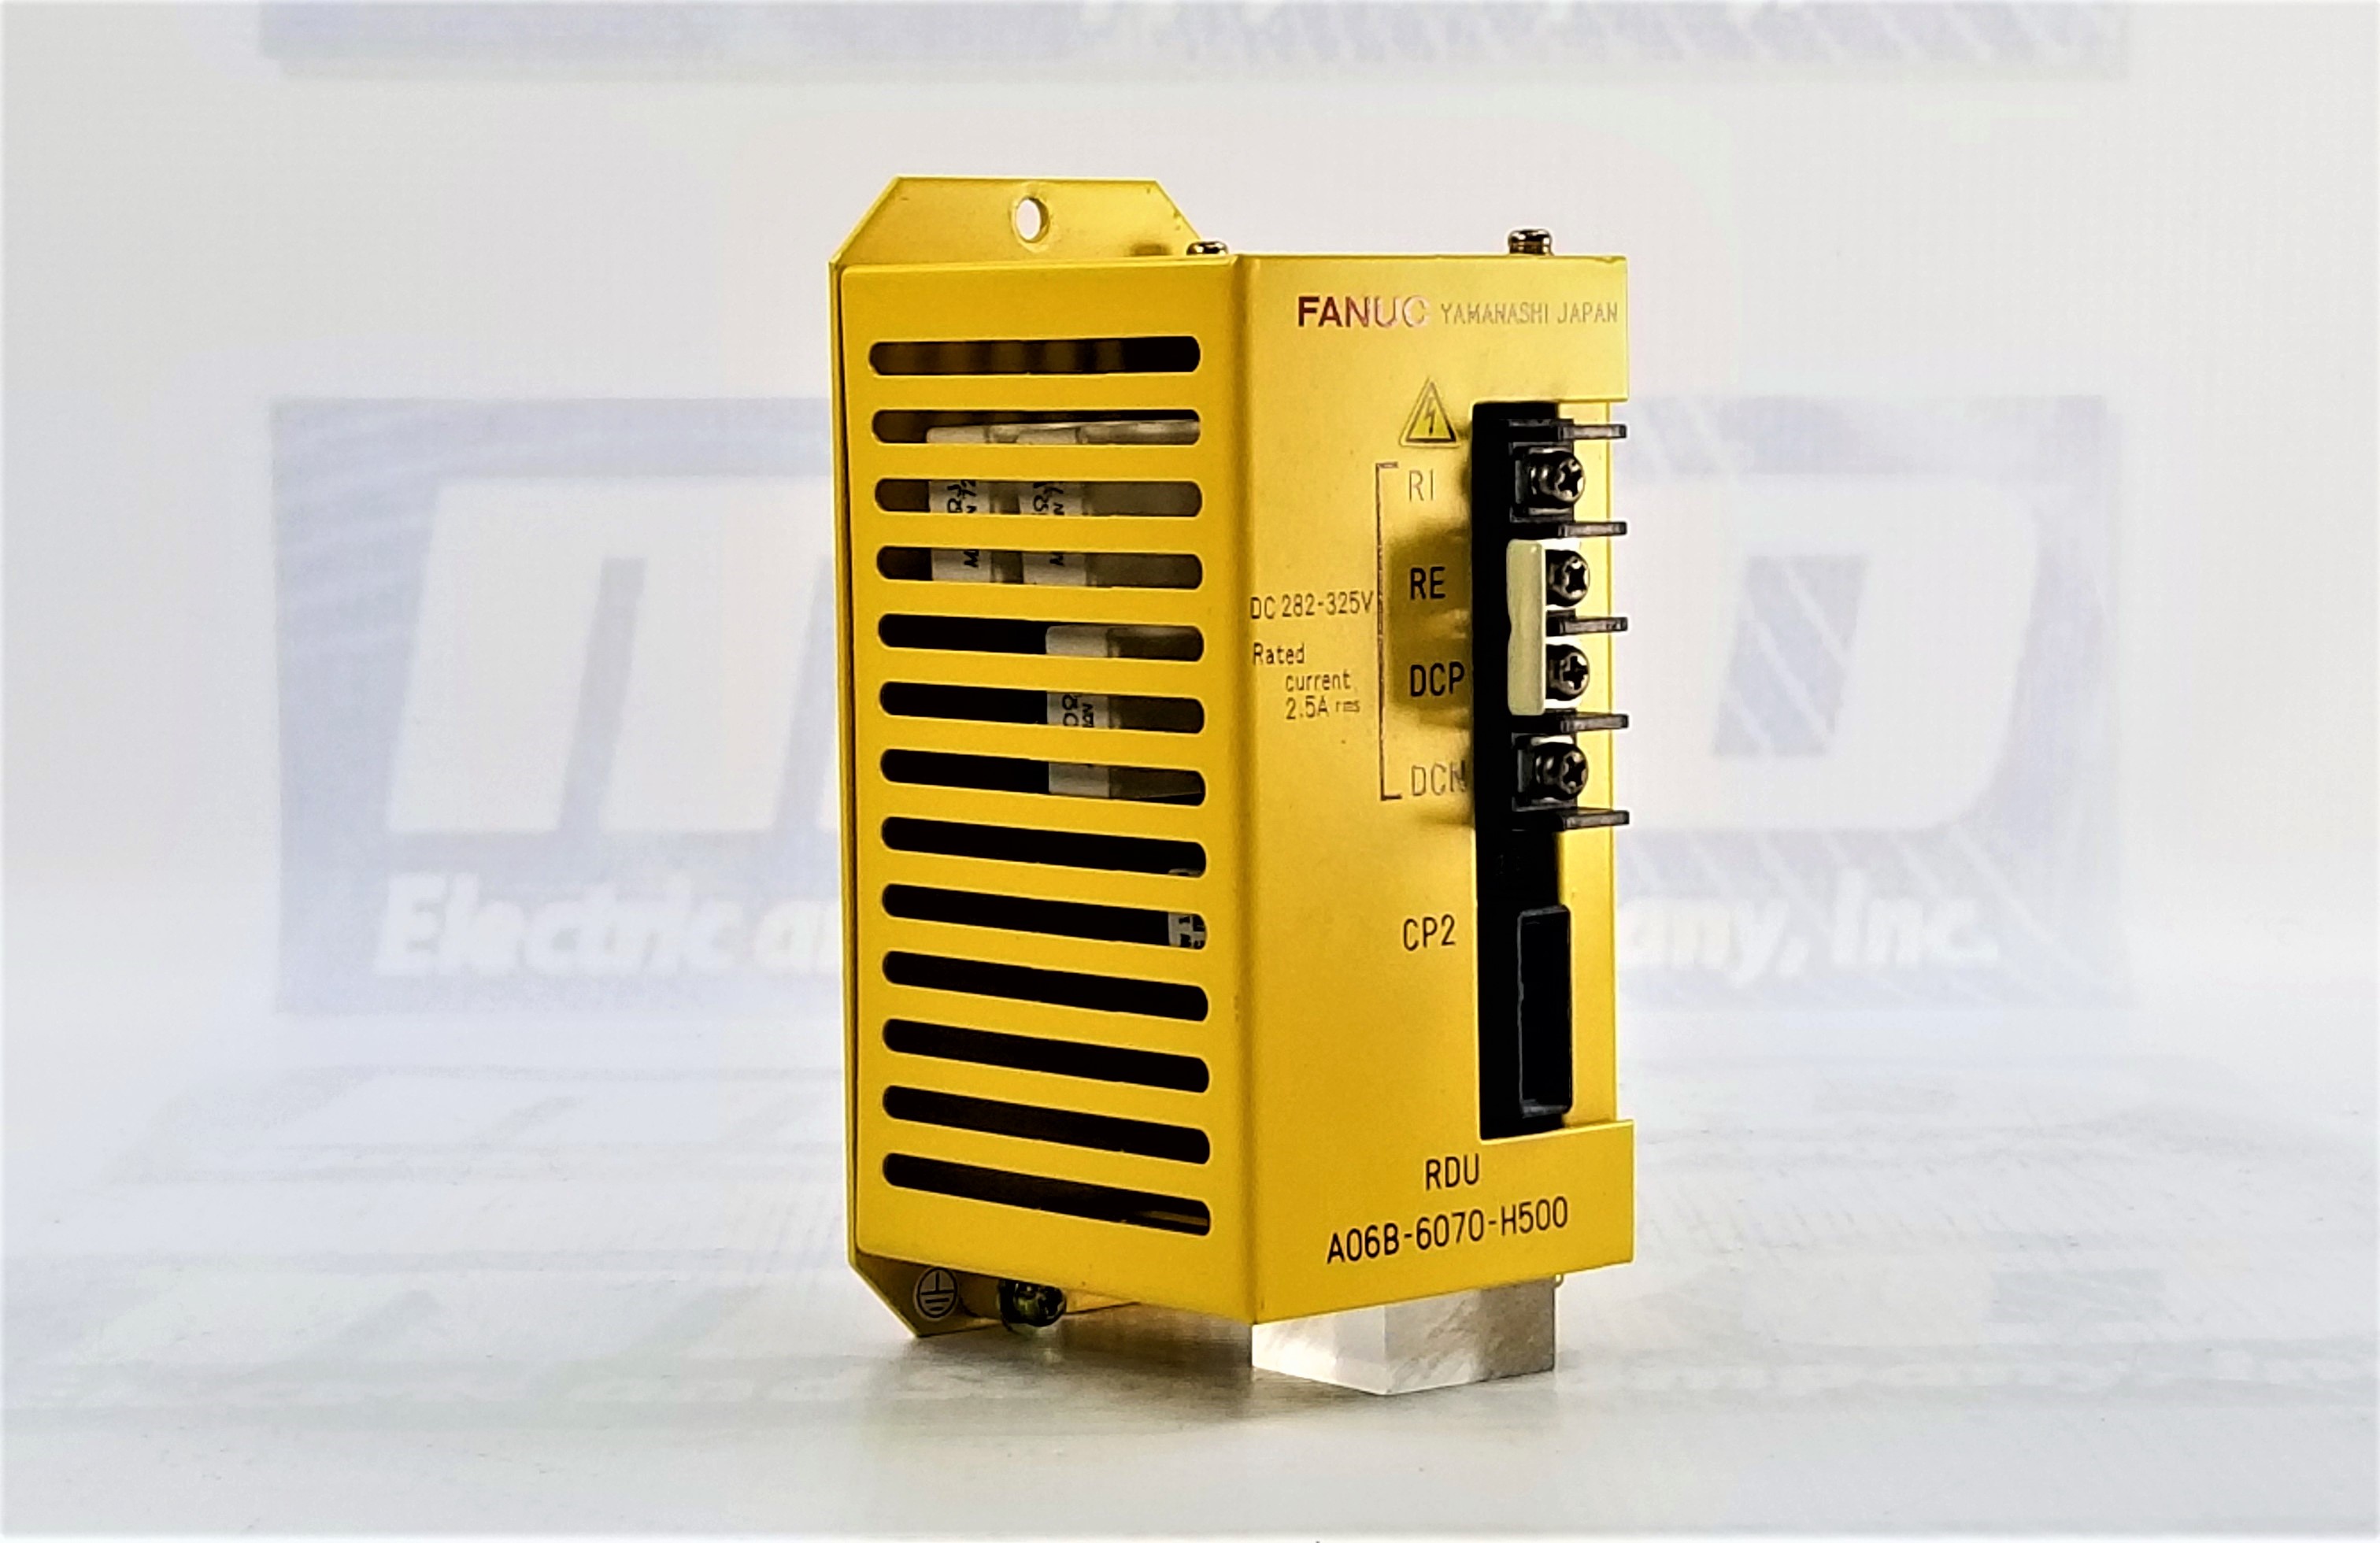 A06B-6070-H500 - FANUC - MRO Electric and Supply